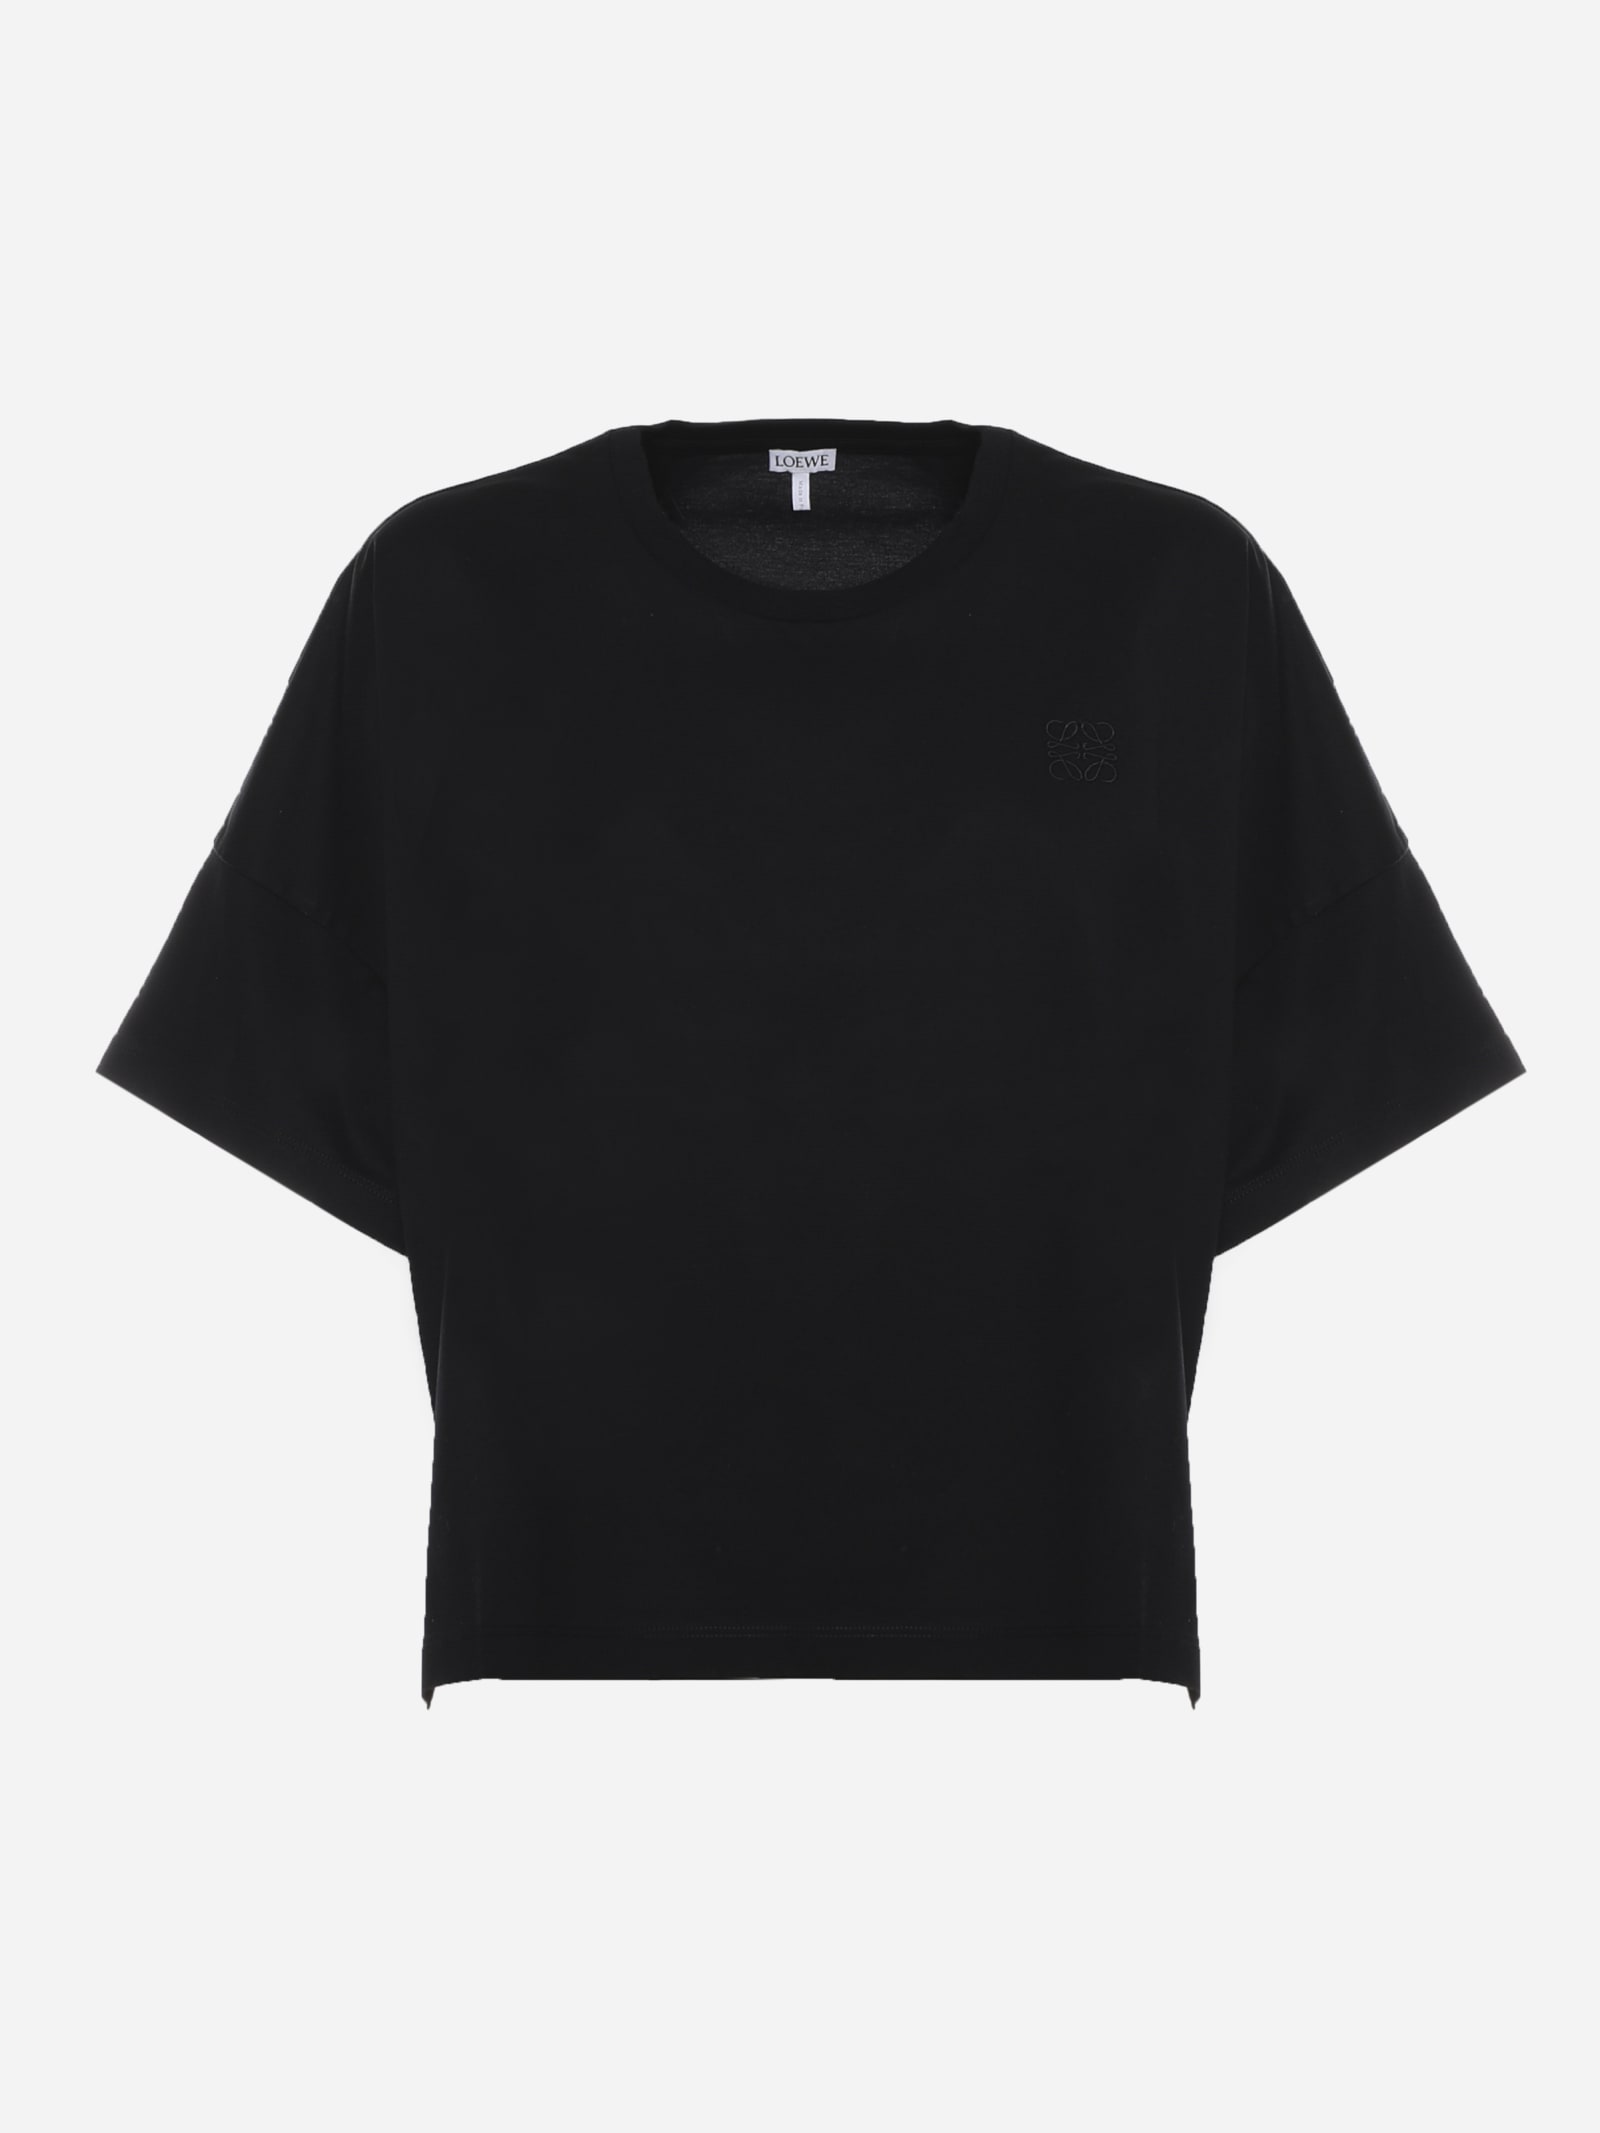 Loewe Cropped Cotton T-shirt With Embroidered Anagram